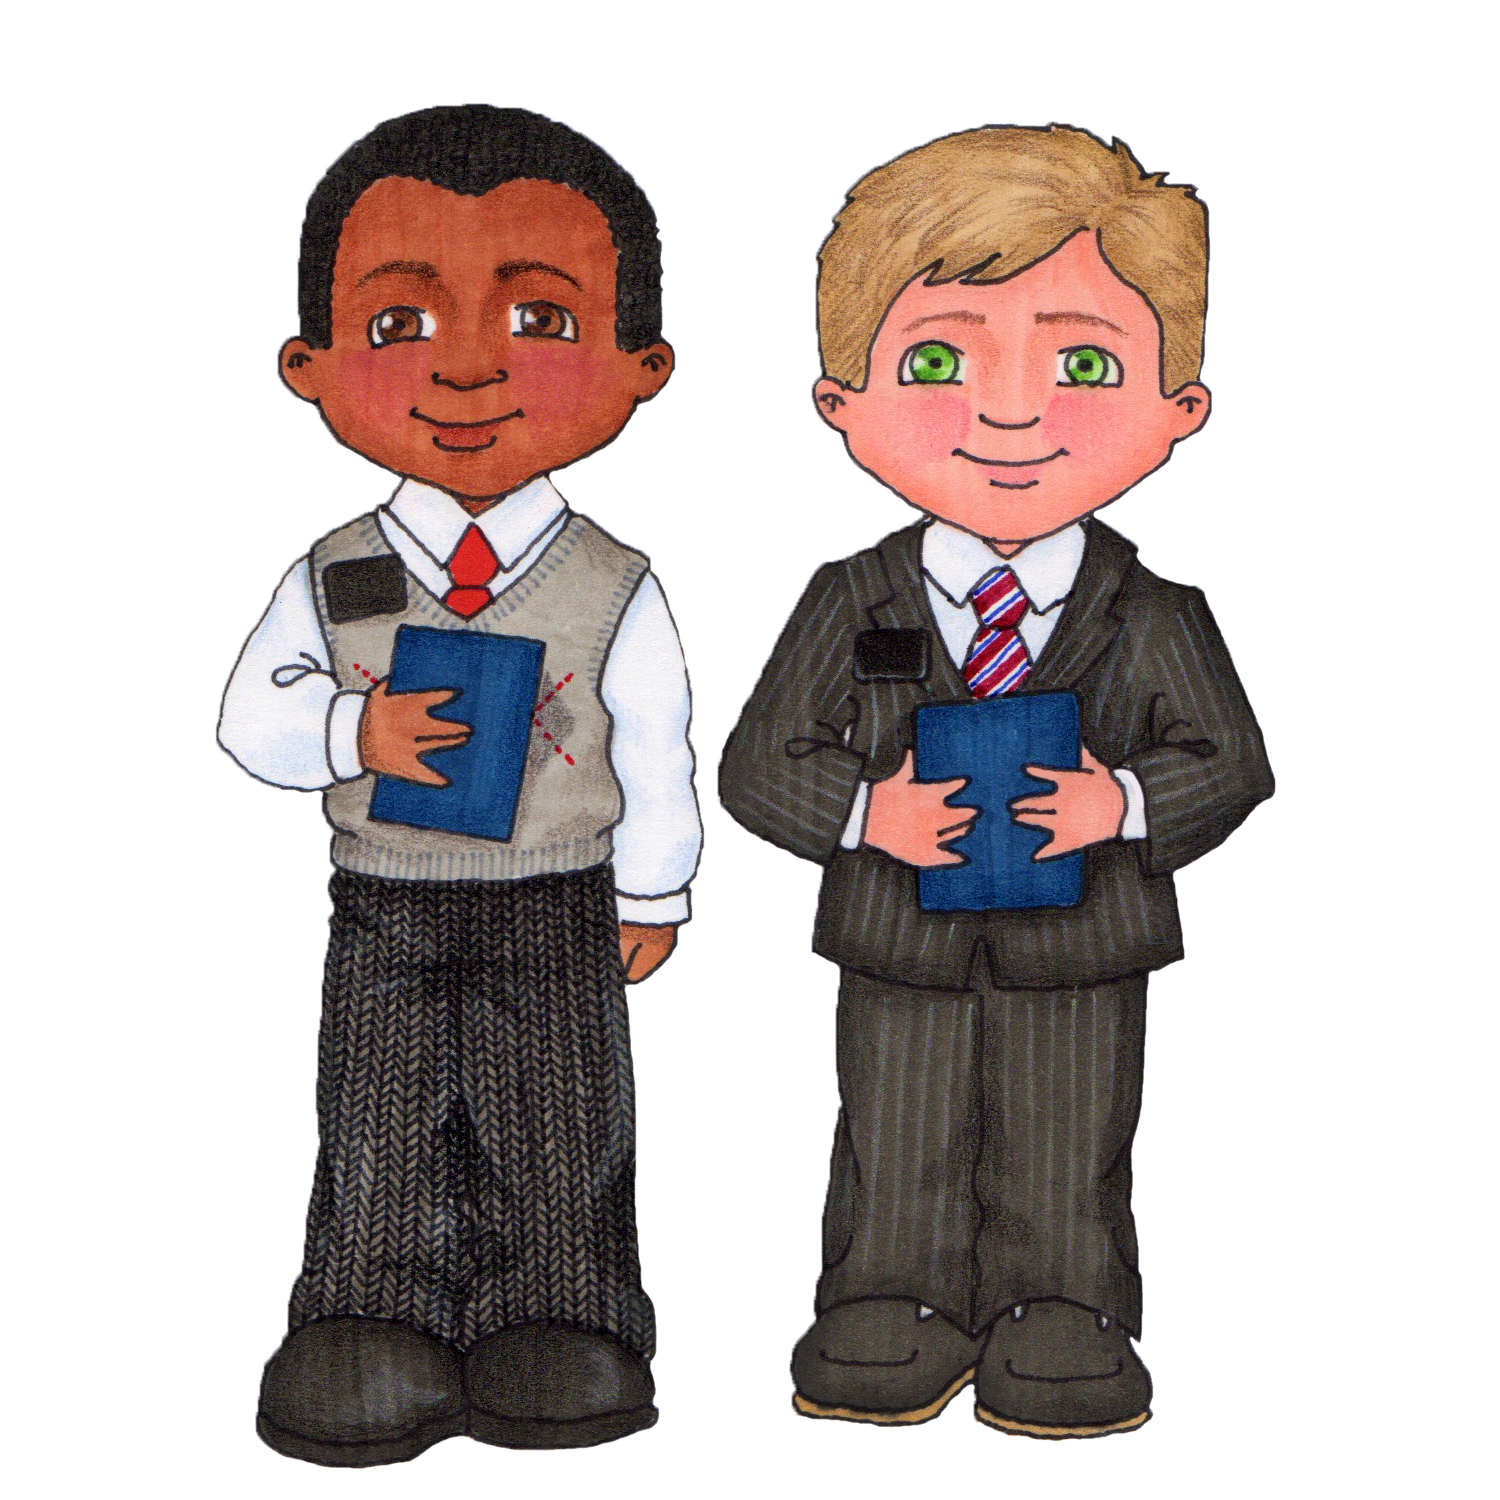 lds clipart missionary - Missionary Clipart